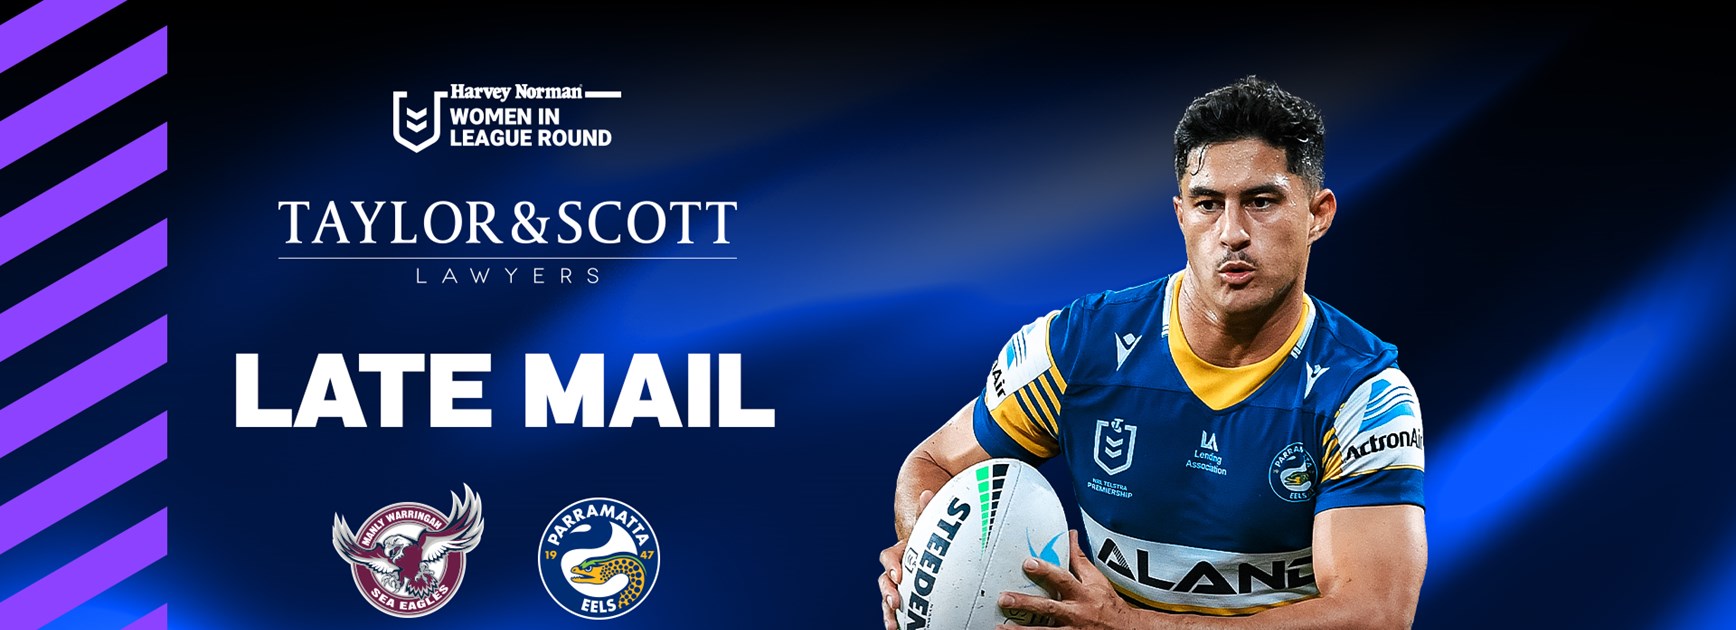 Late Mail - Sea Eagles v Eels, Round 22